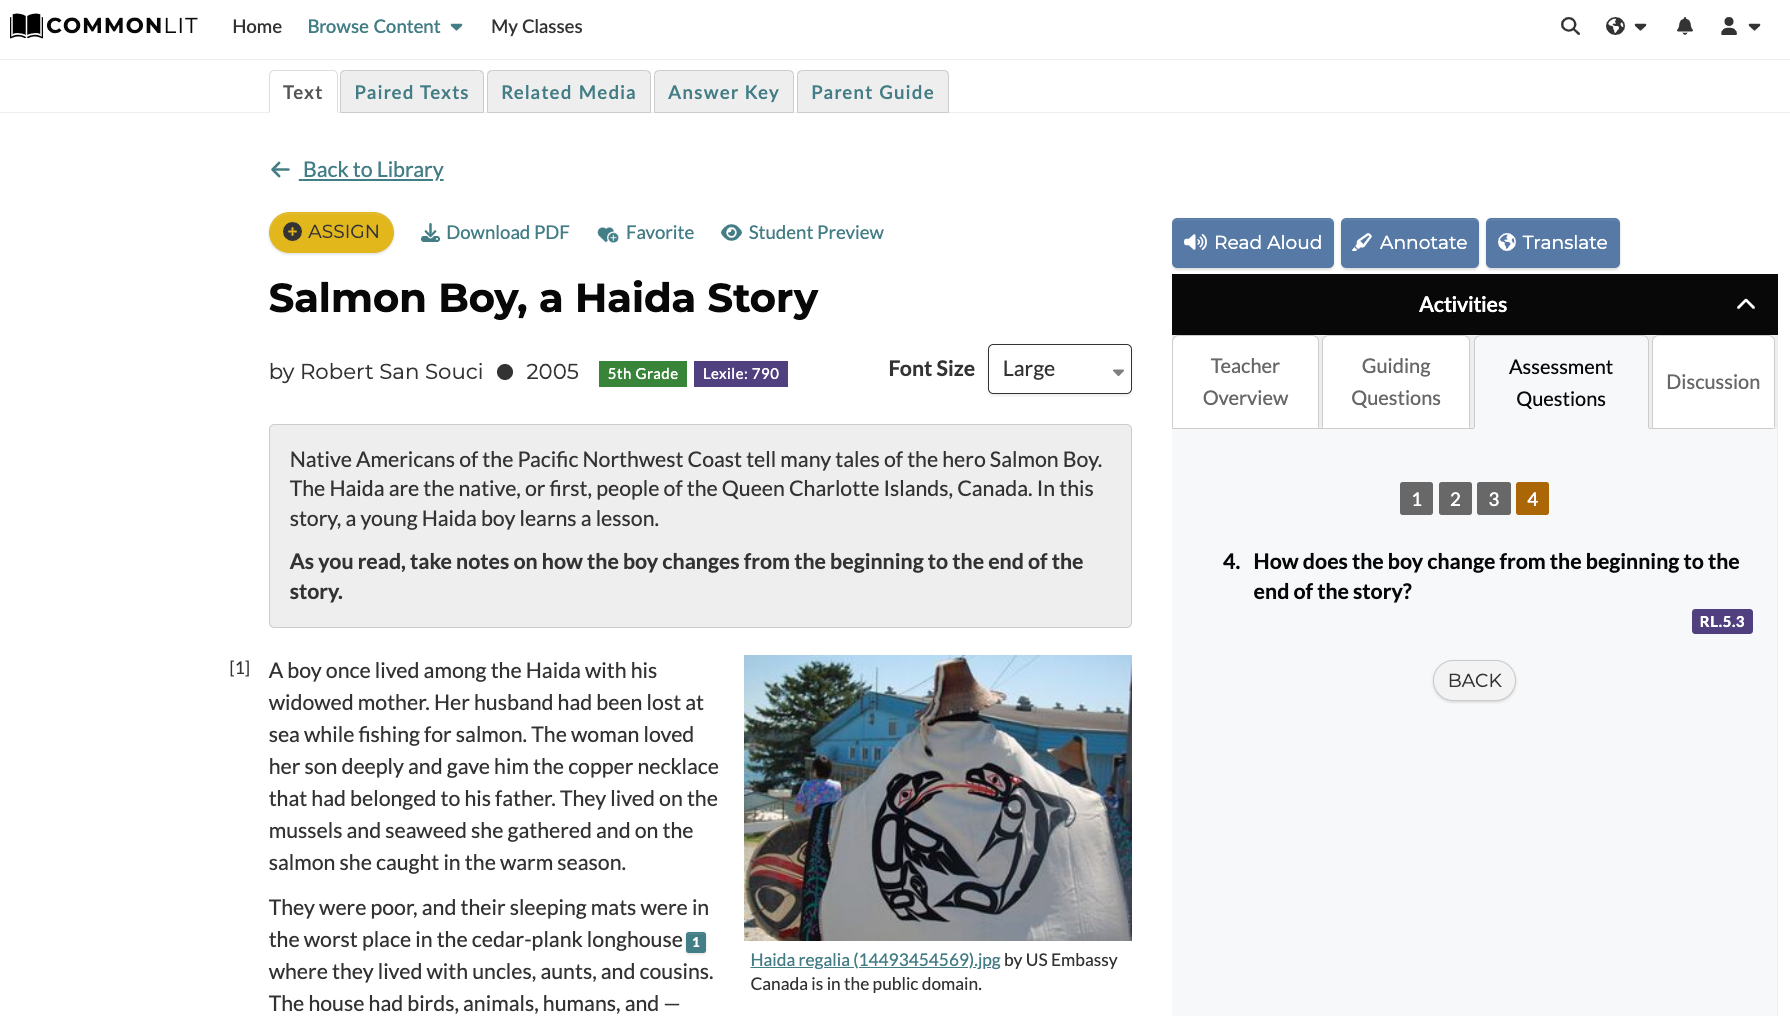 CommonLit Reading Lesson "Salmon Boy, A Haida Story" by Robert San Souci. This is a Native American story.